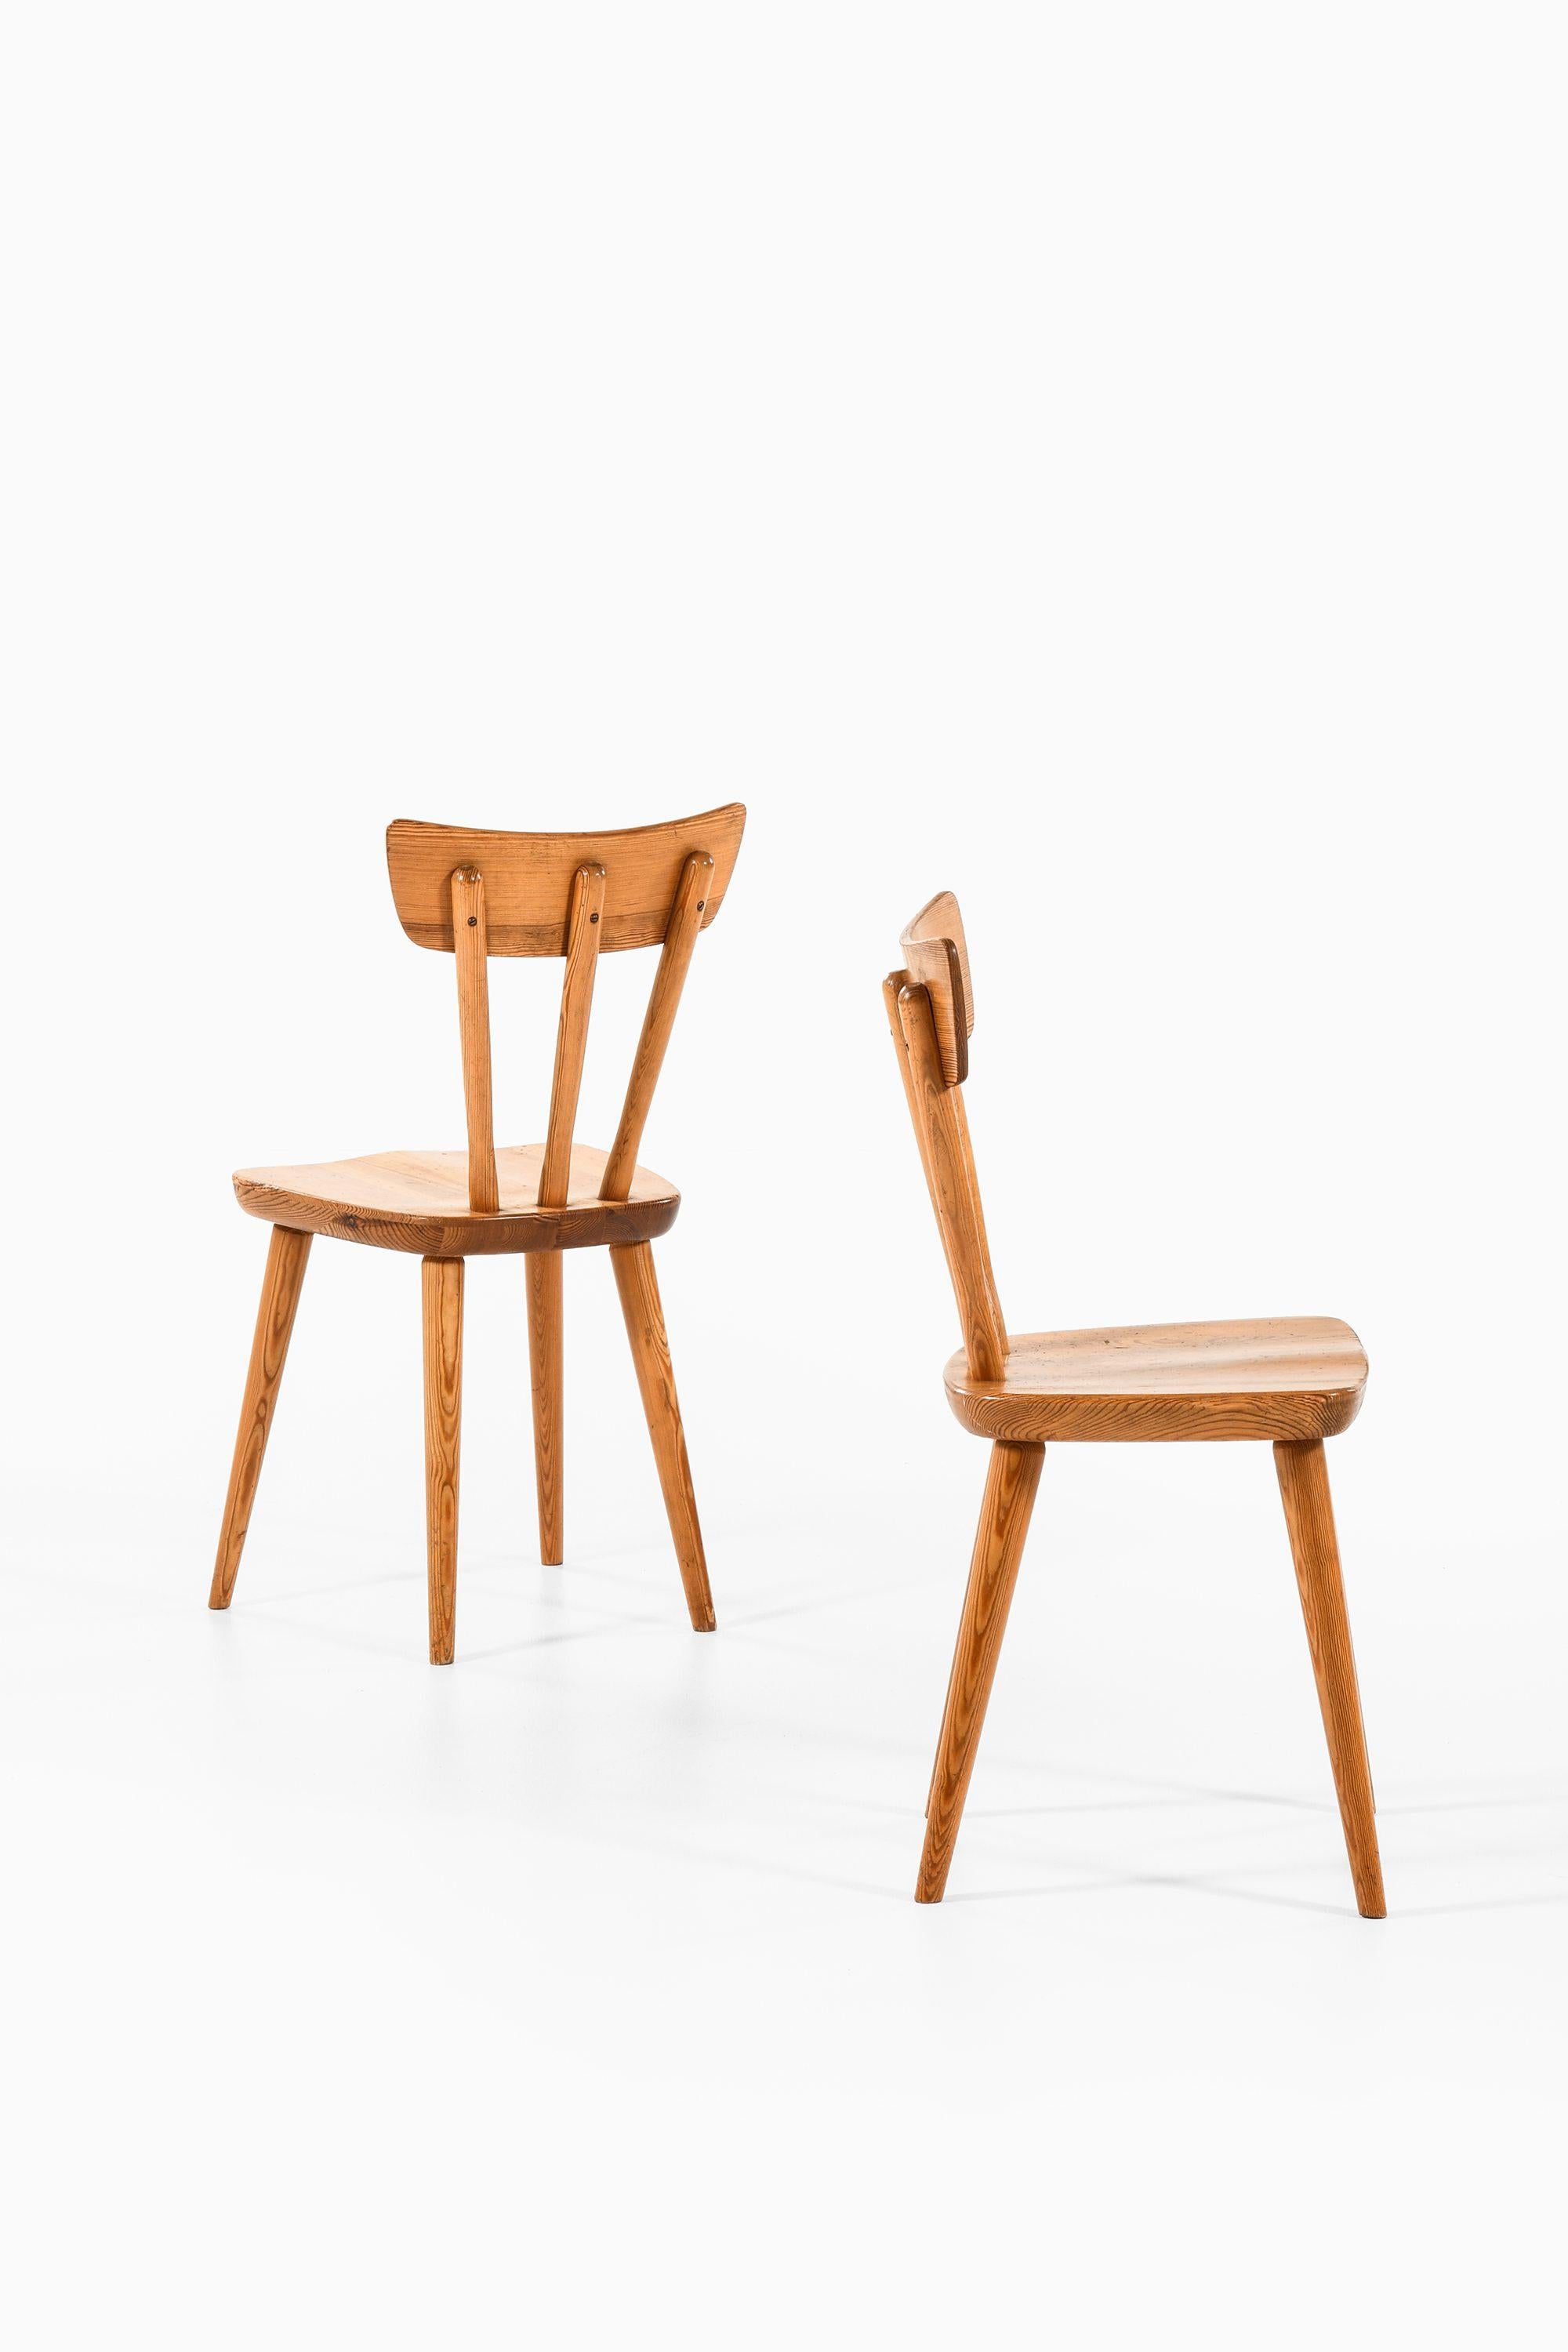 Set of 8 Dining Chairs in Solid Pine by Göran Malmvall, 1940's

Additional Information:
Material: Solid pine
Style: Mid century, Scandinavian
Produced by Svensk fur in Sweden
Dimensions (W x D x H): 40.5 x 42 x 81.5 cm
Seat Height: 44 cm
Condition: